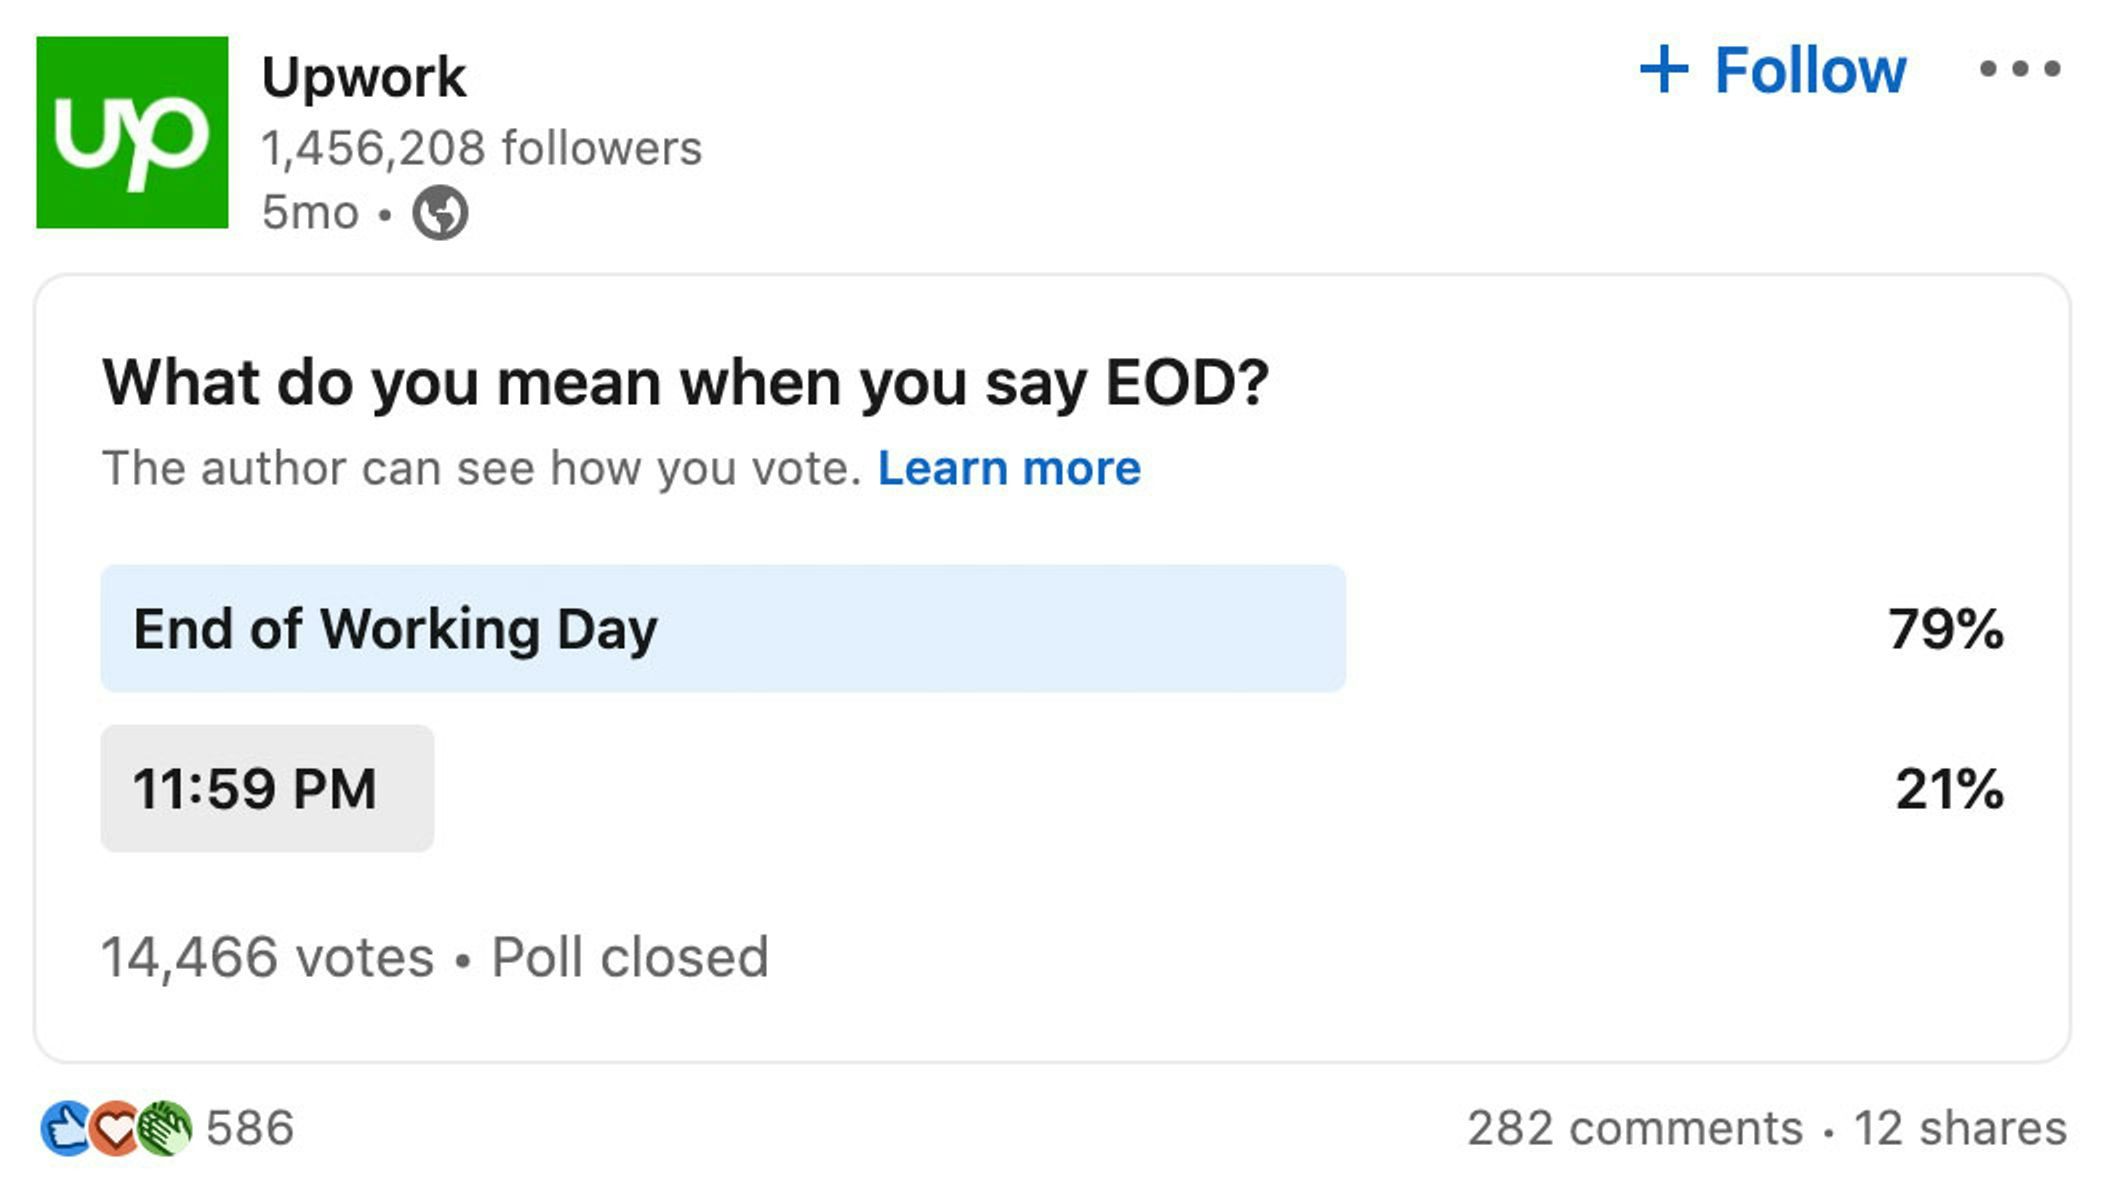 A social media poll by Upwork asking what EOD means: 79% chose End of Working Day; 21% picked 11:59 PM. #PollResults